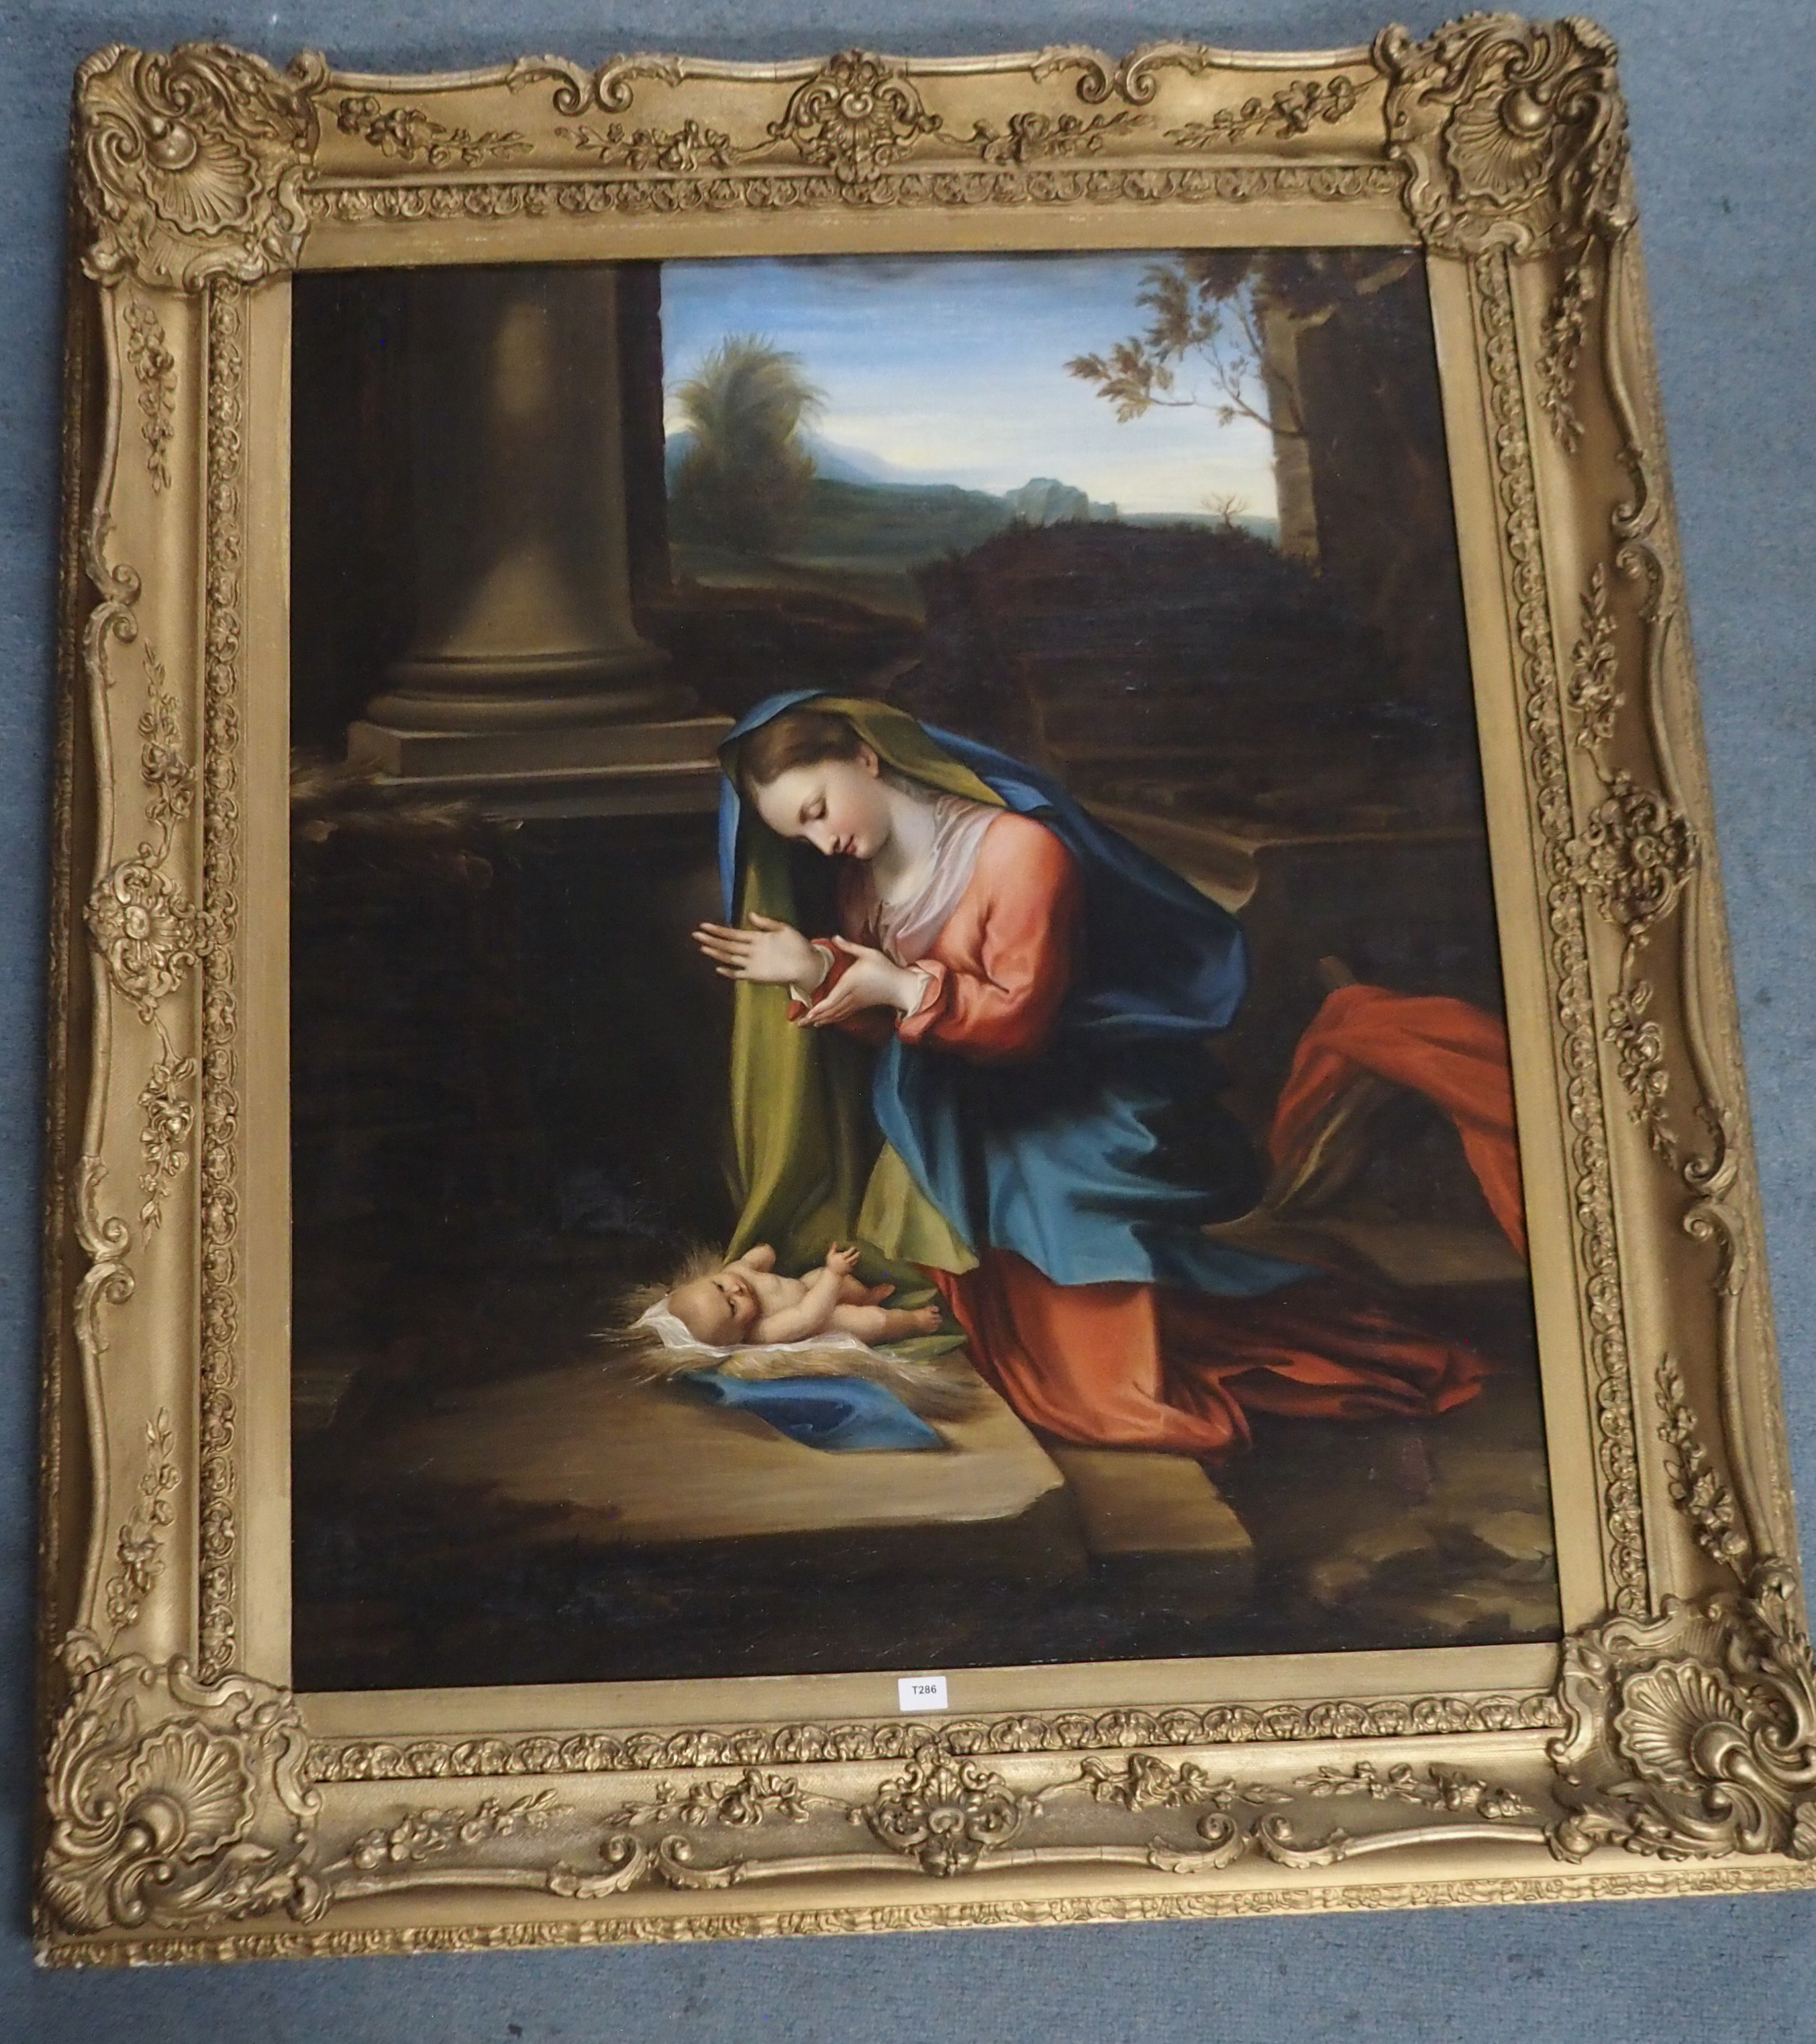 ITALIAN SCHOOL (18TH/19TH CENTURY) THE VIRGIN ADORING THE CHRIST CHILD IN THE RUINS Oil on canvas, - Image 3 of 7